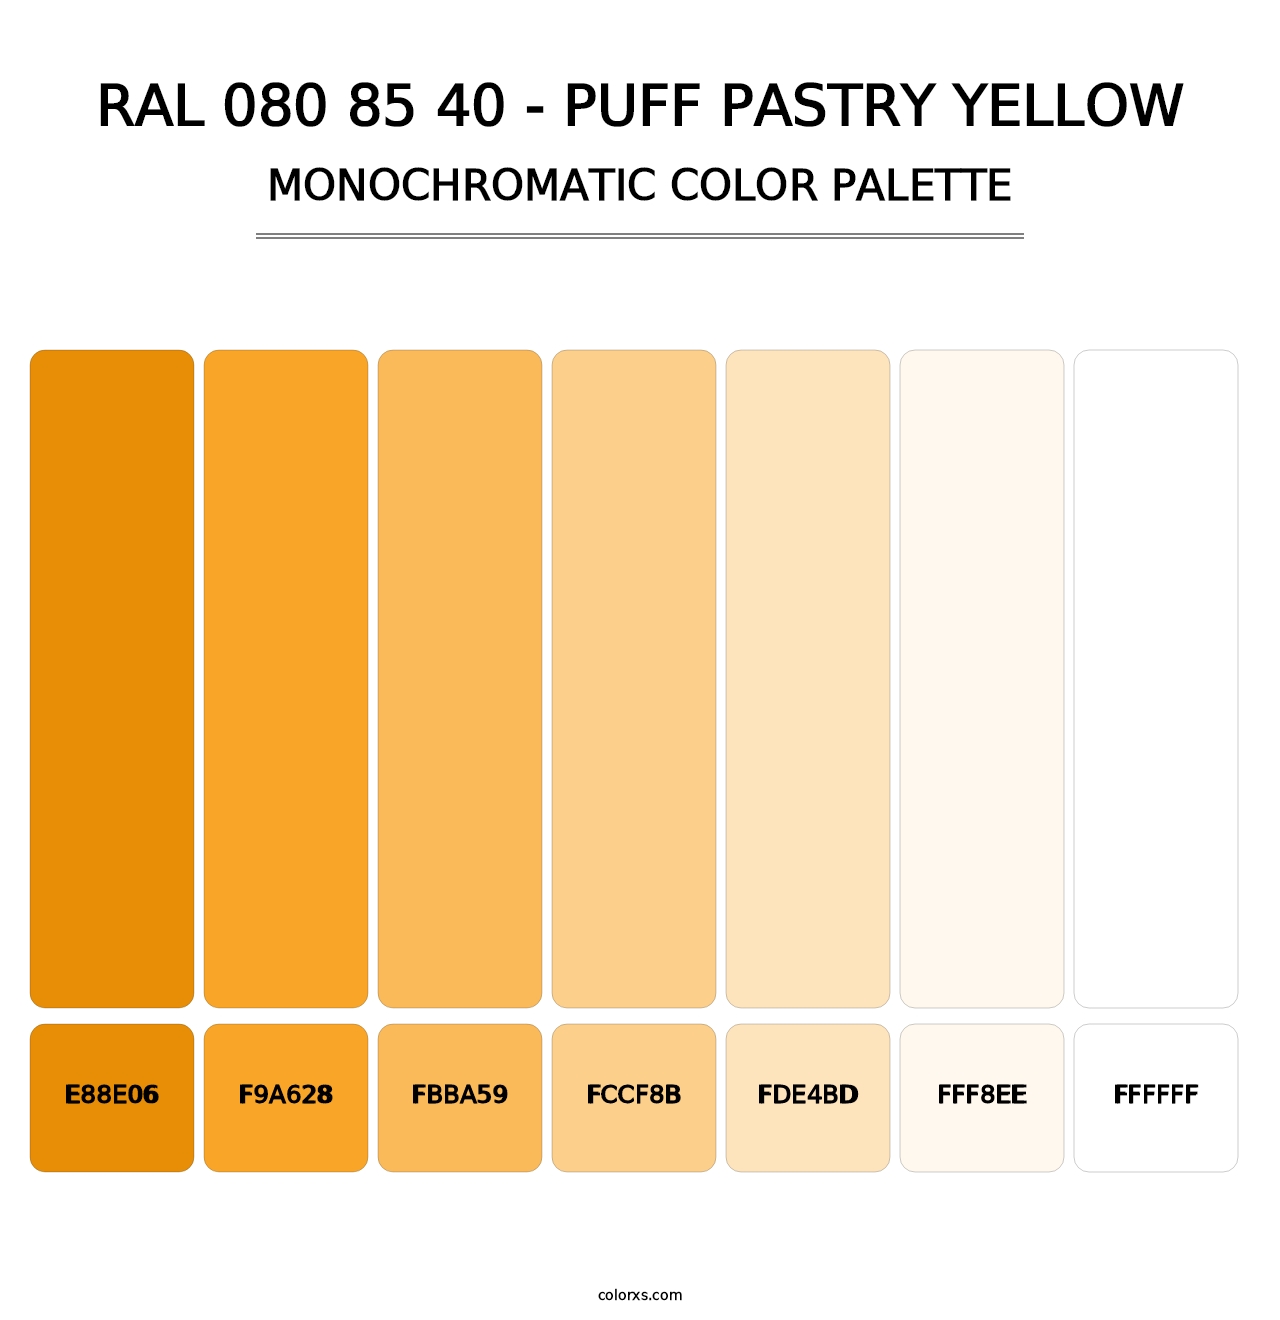 RAL 080 85 40 - Puff Pastry Yellow - Monochromatic Color Palette